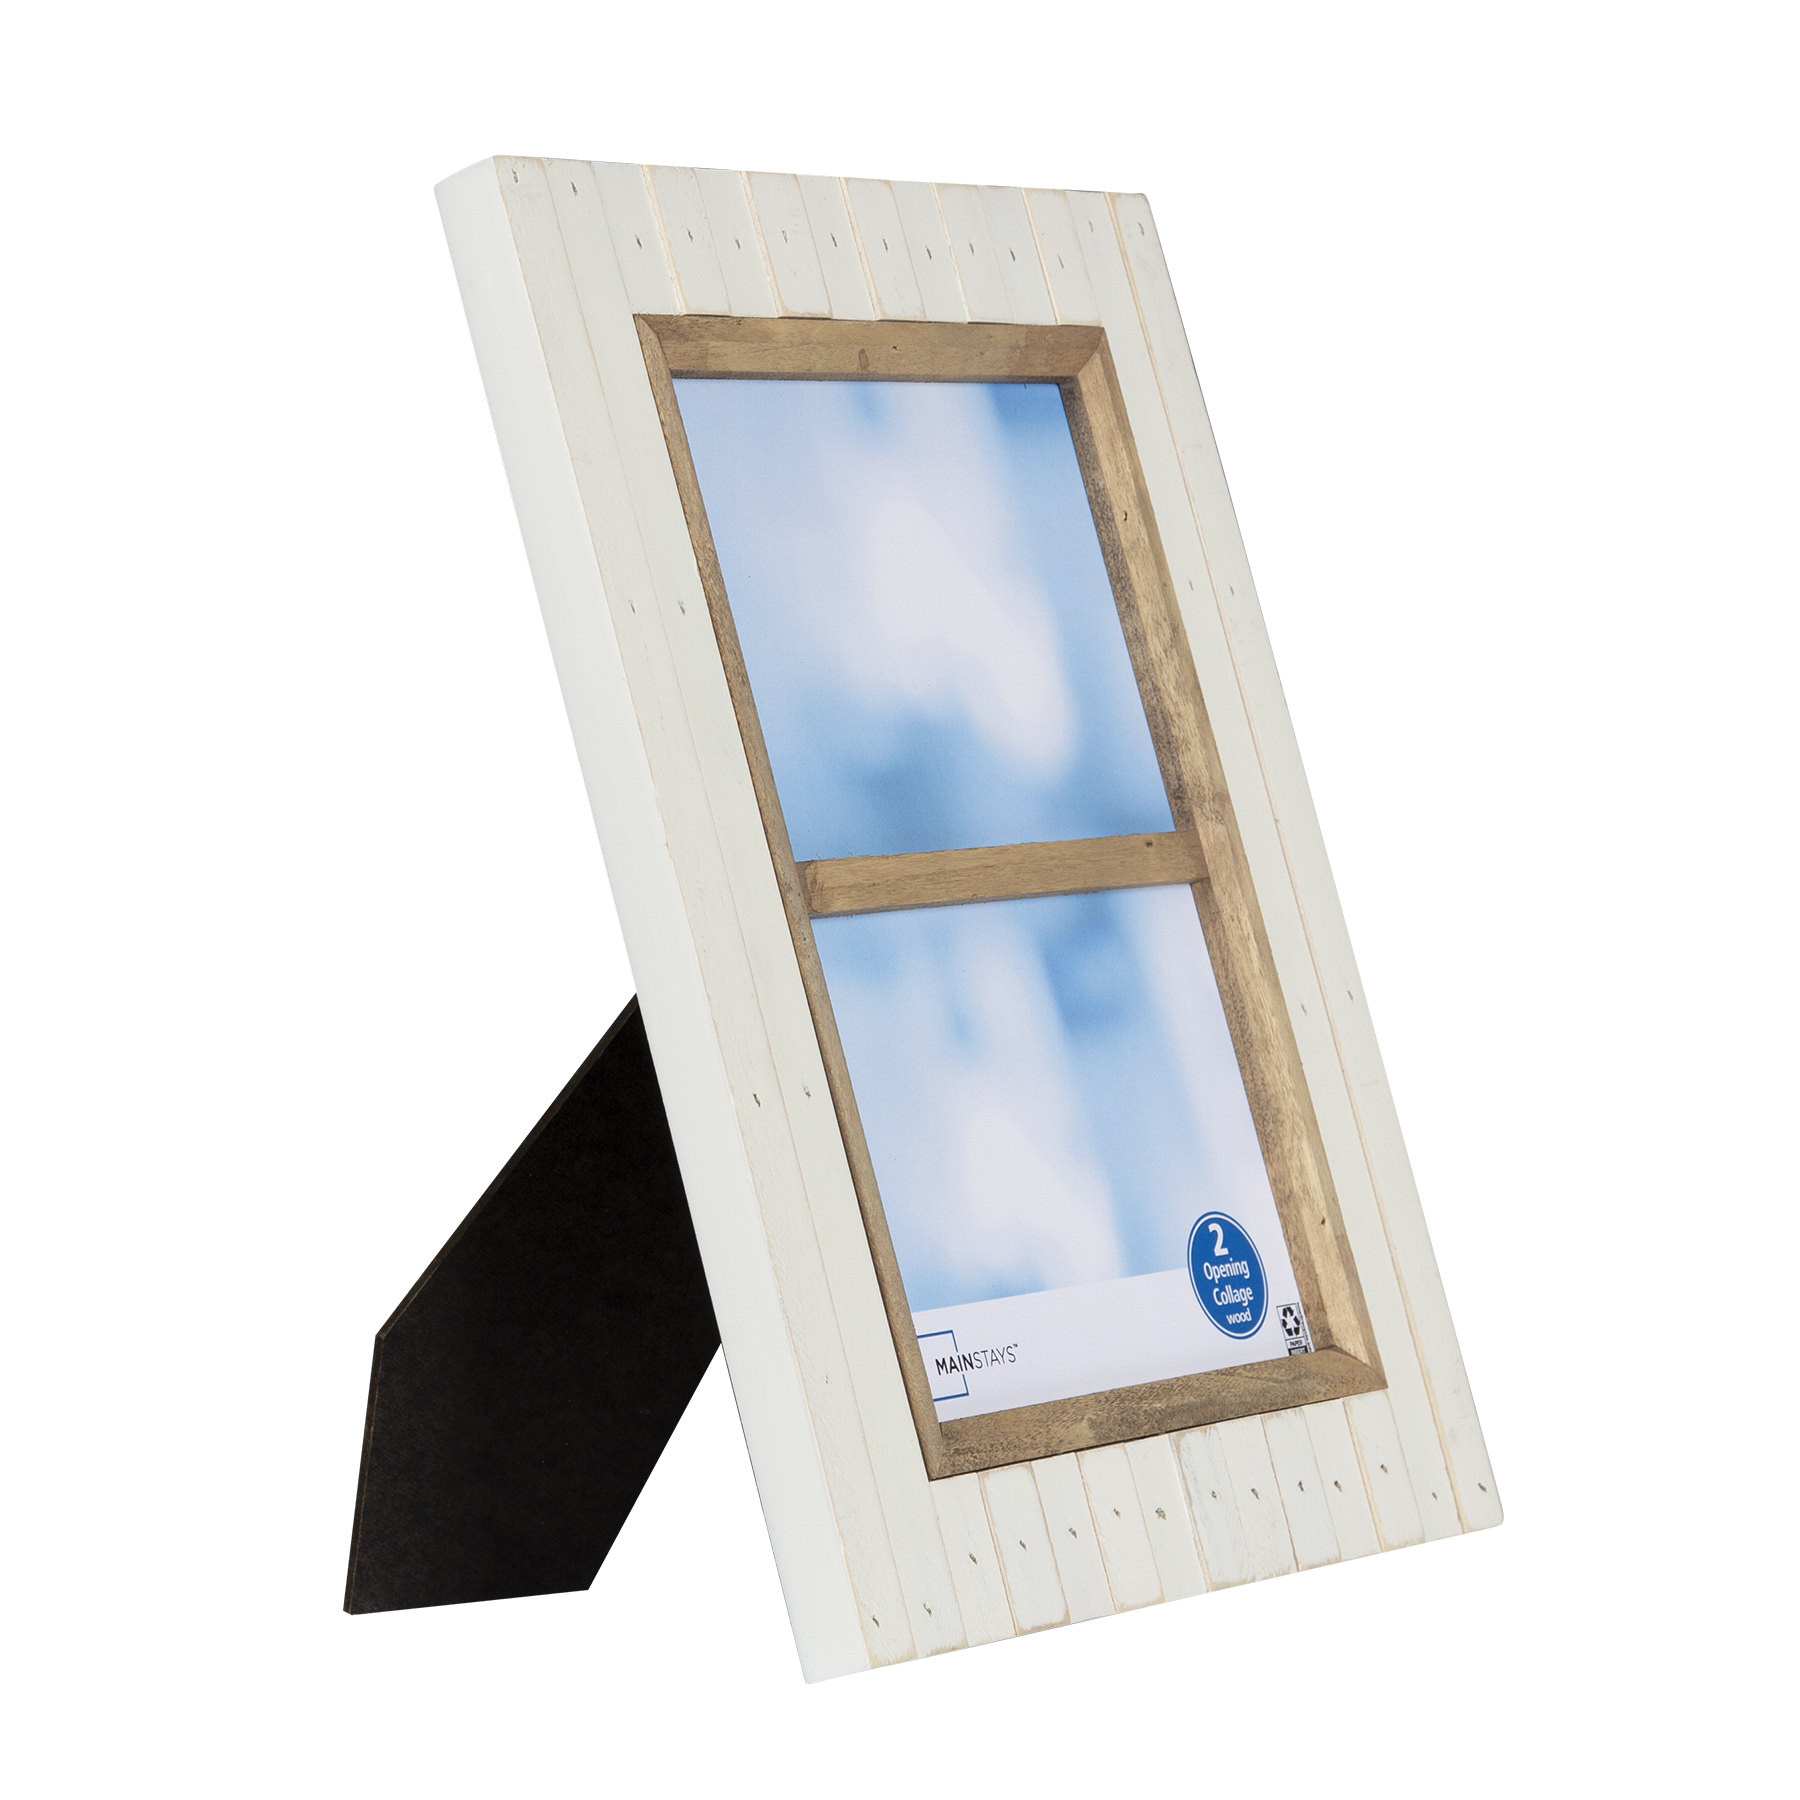 Mainstays Oracoke 2-Opening 5x7 Cream Collage Picture Frame - image 5 of 6